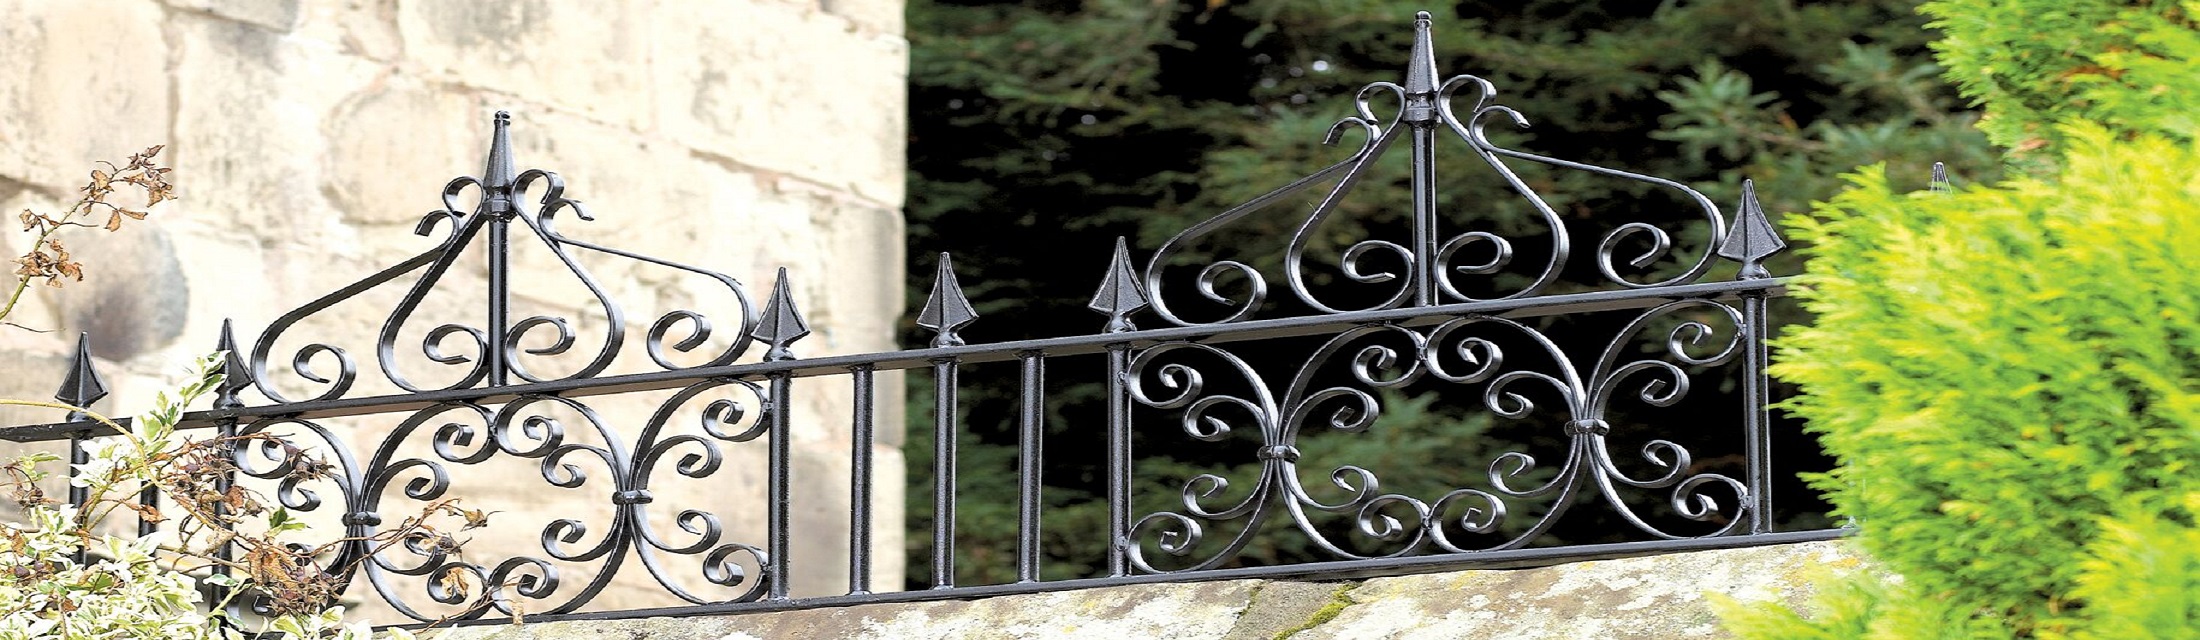 Wrought iron style metal railing example